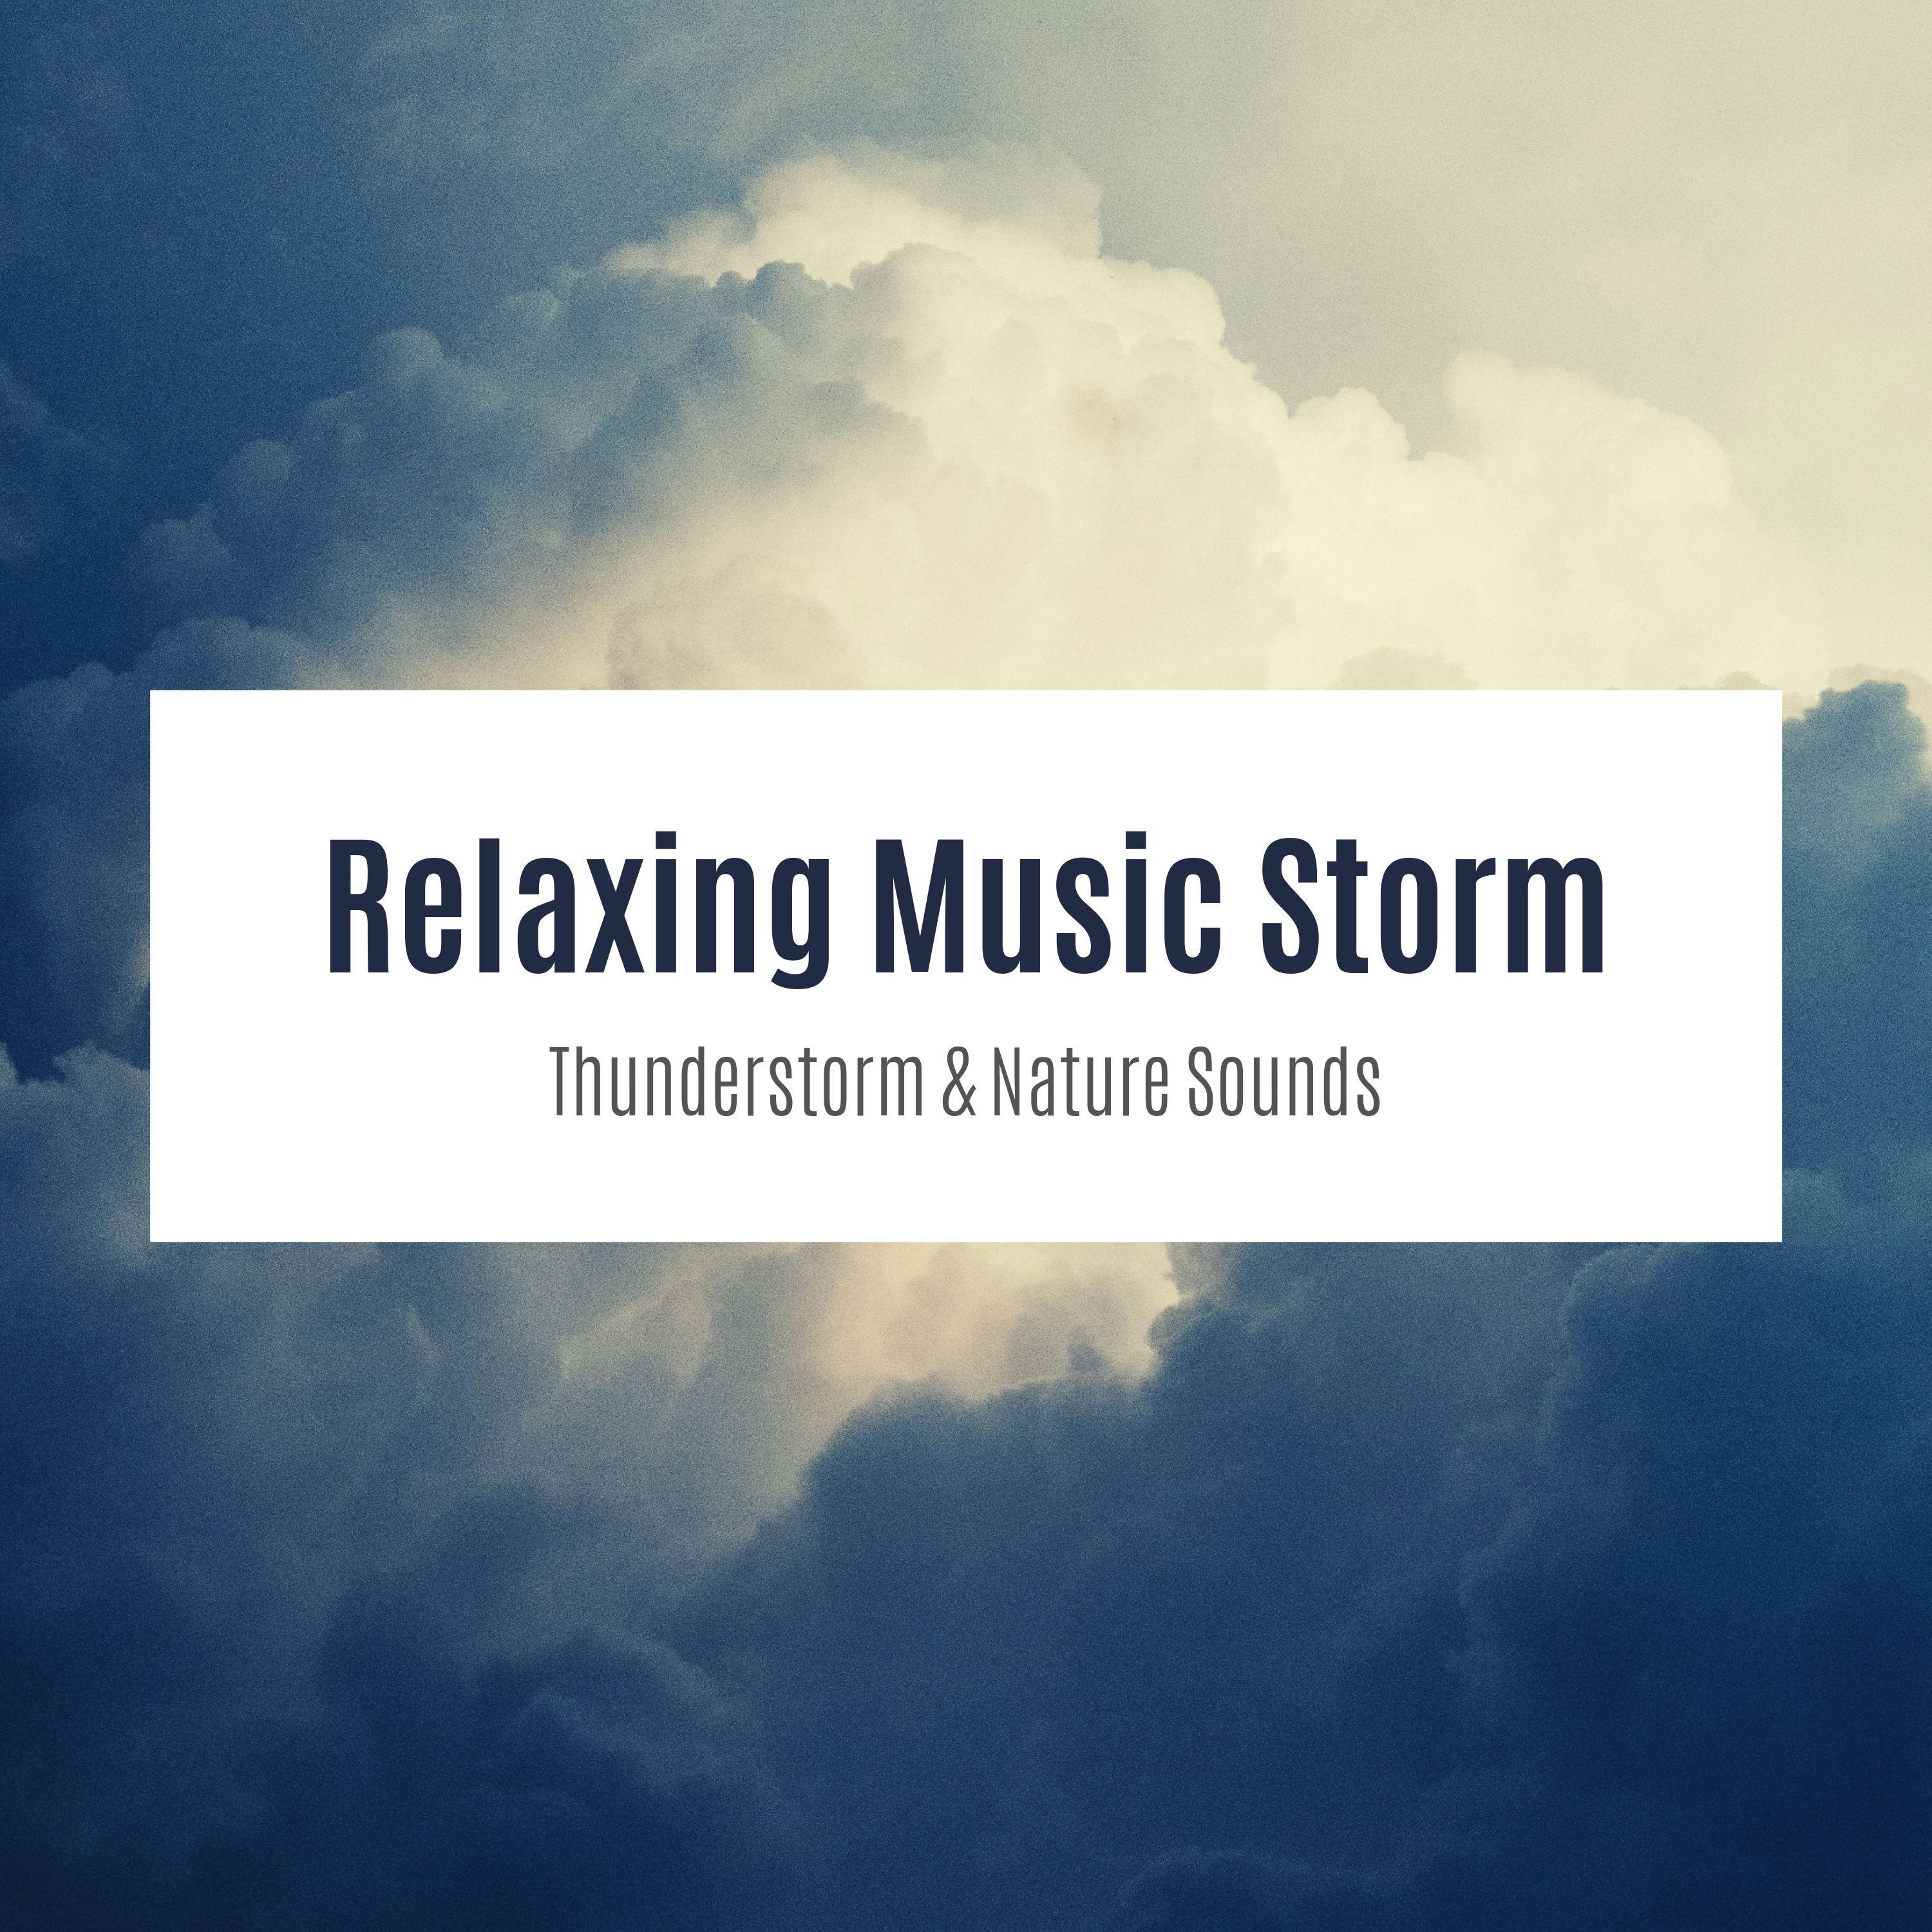 Relaxing Music Storm